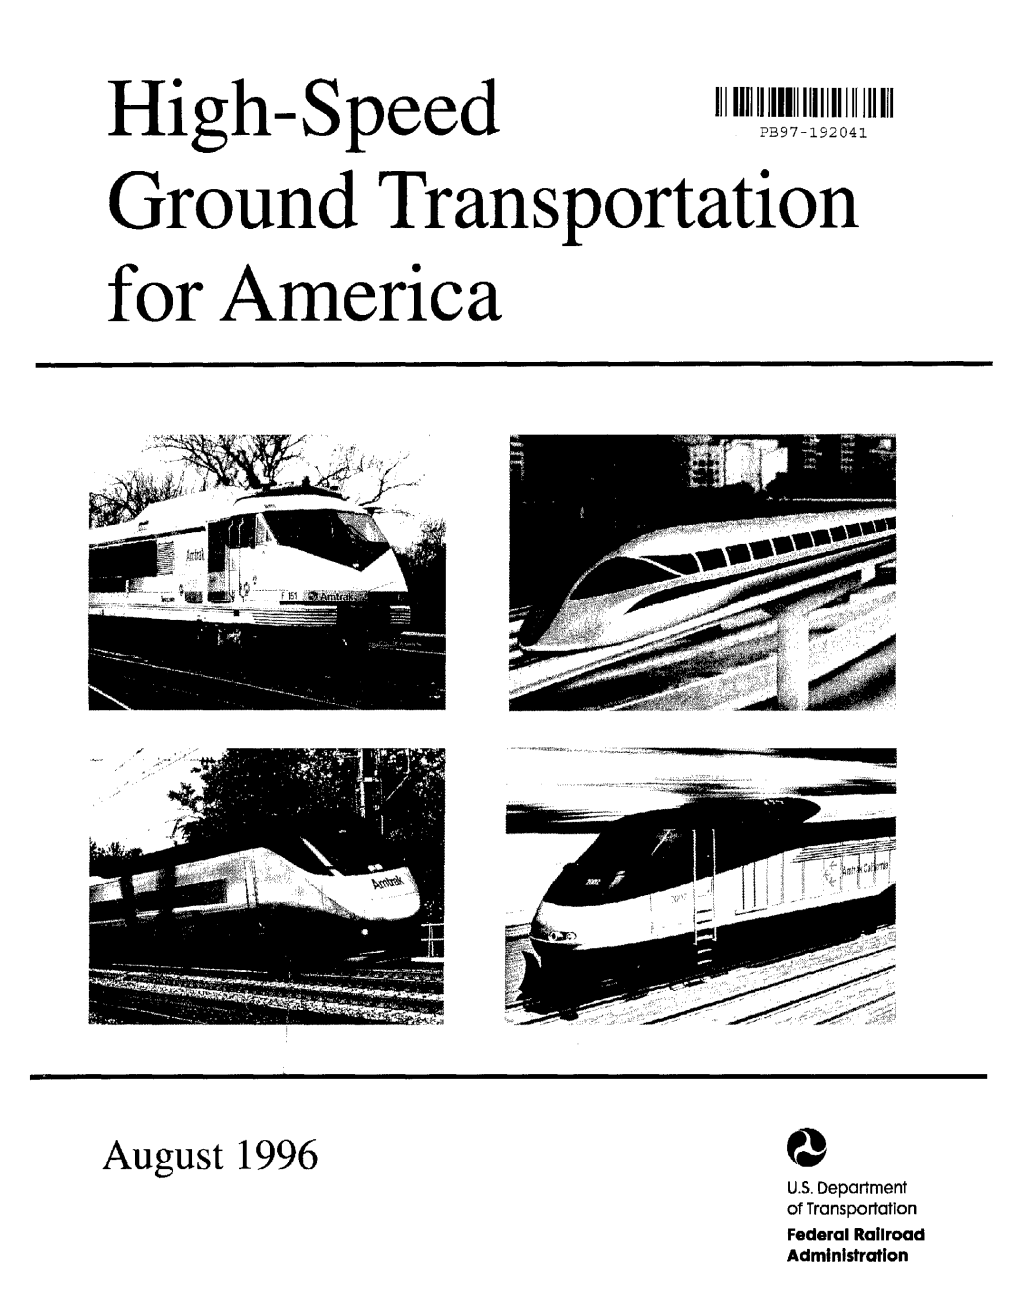 High-Speed Ground Transportation for America